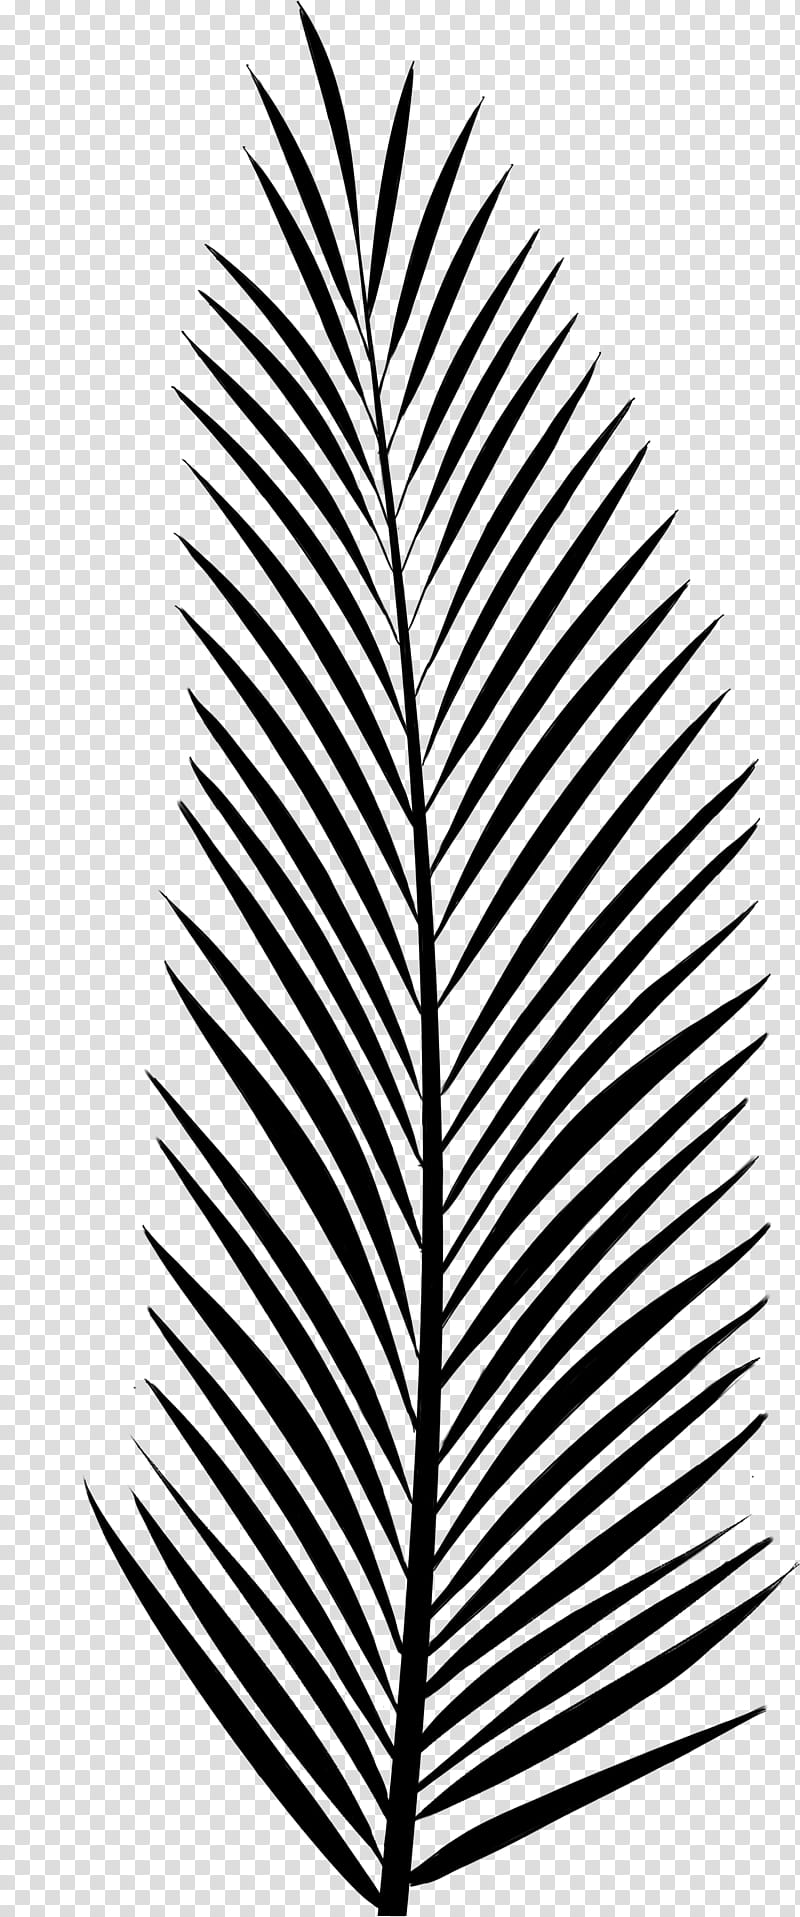 Pine Tree Silhouette, Palm Trees, Leaf, Vascular Plant, Fir, Maple, Drawing, Blue Spruce transparent background PNG clipart